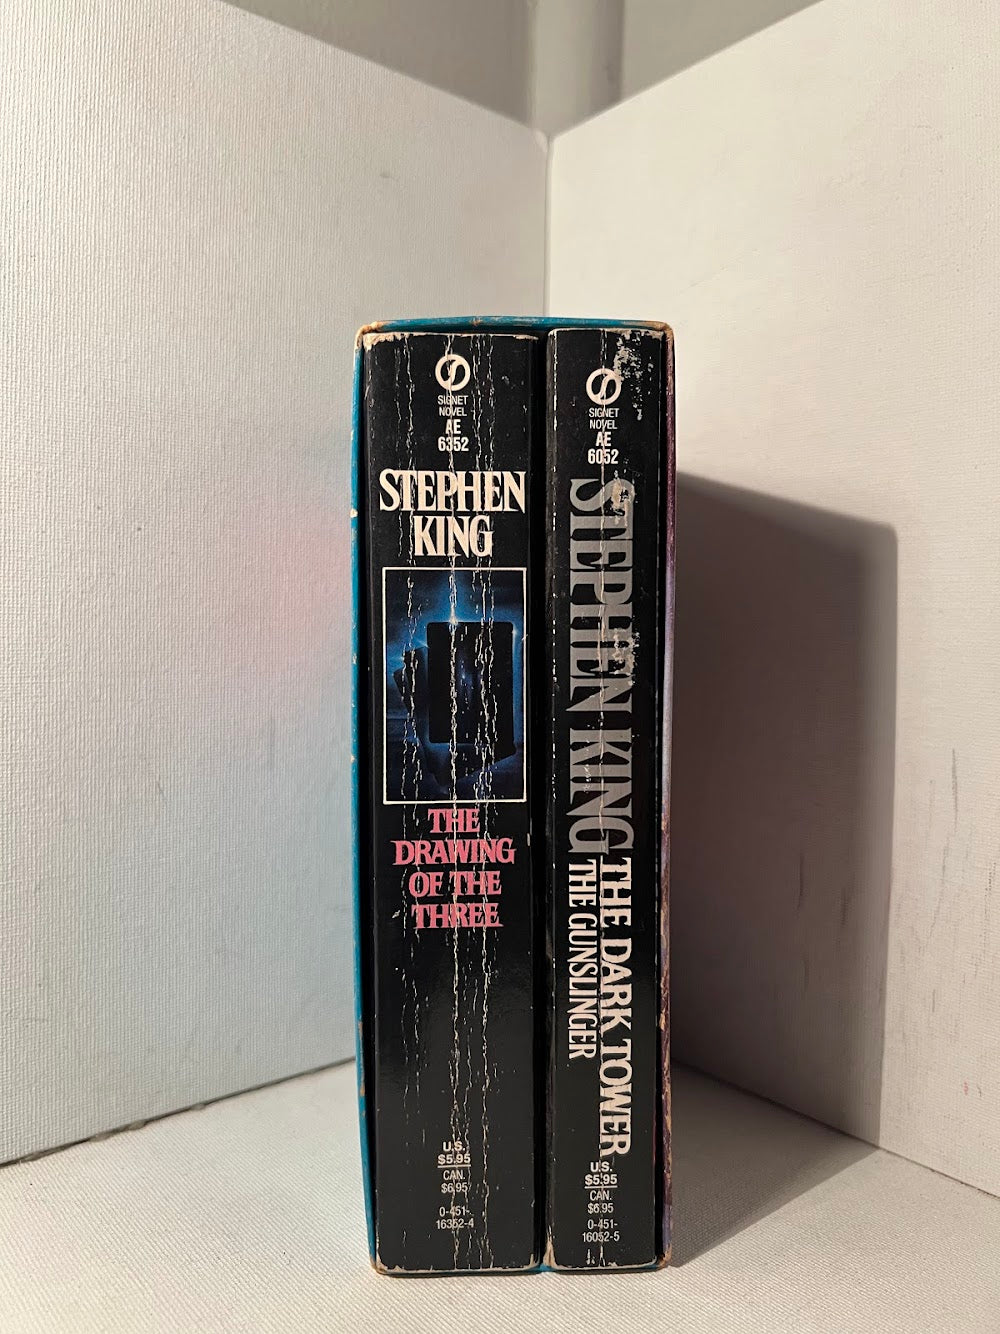 The Gunslinger & The Drawing of the Three by Stephen King (Dark Tower 2 vol box set)